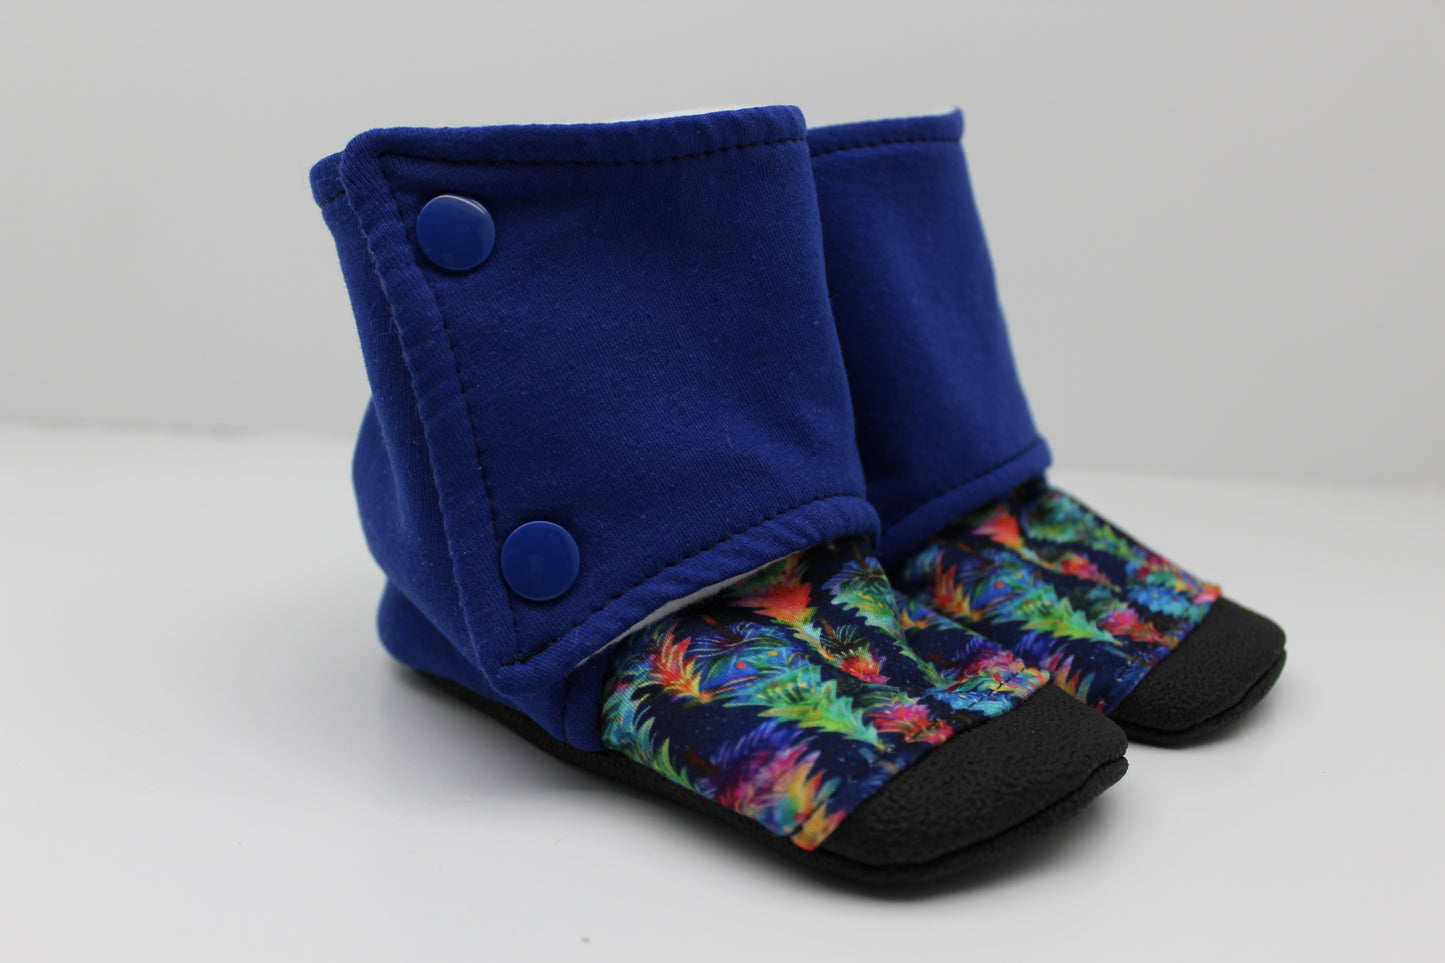 Rainbow Pines Stay On Boots Preorder - Multiple Options - 4-6 week TAT